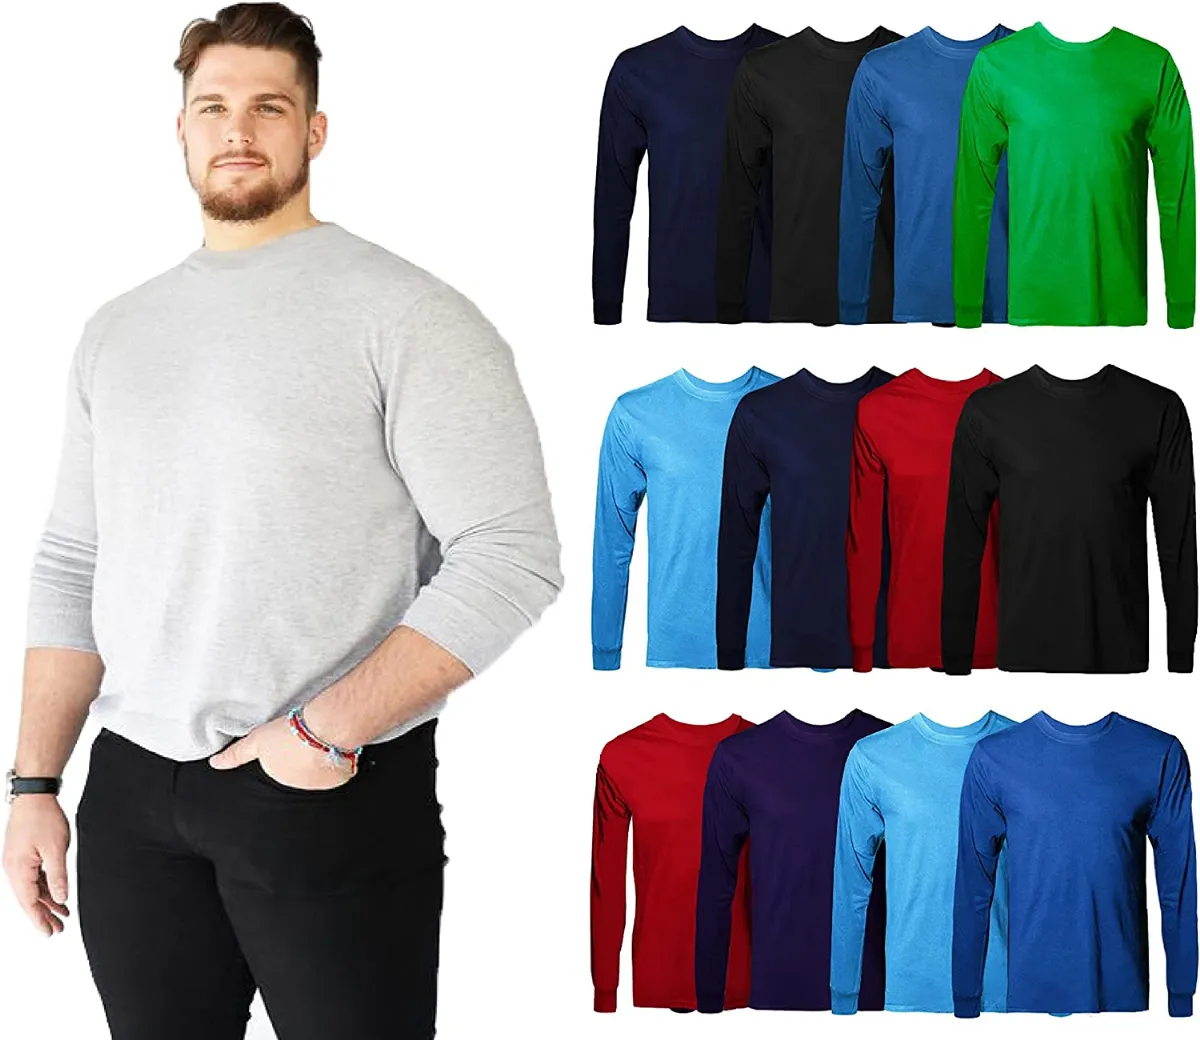 12 Pieces Mens Cotton Long Sleeve Tee Shirt Assorted Colors Size 4x Large - Mens T-Shirts